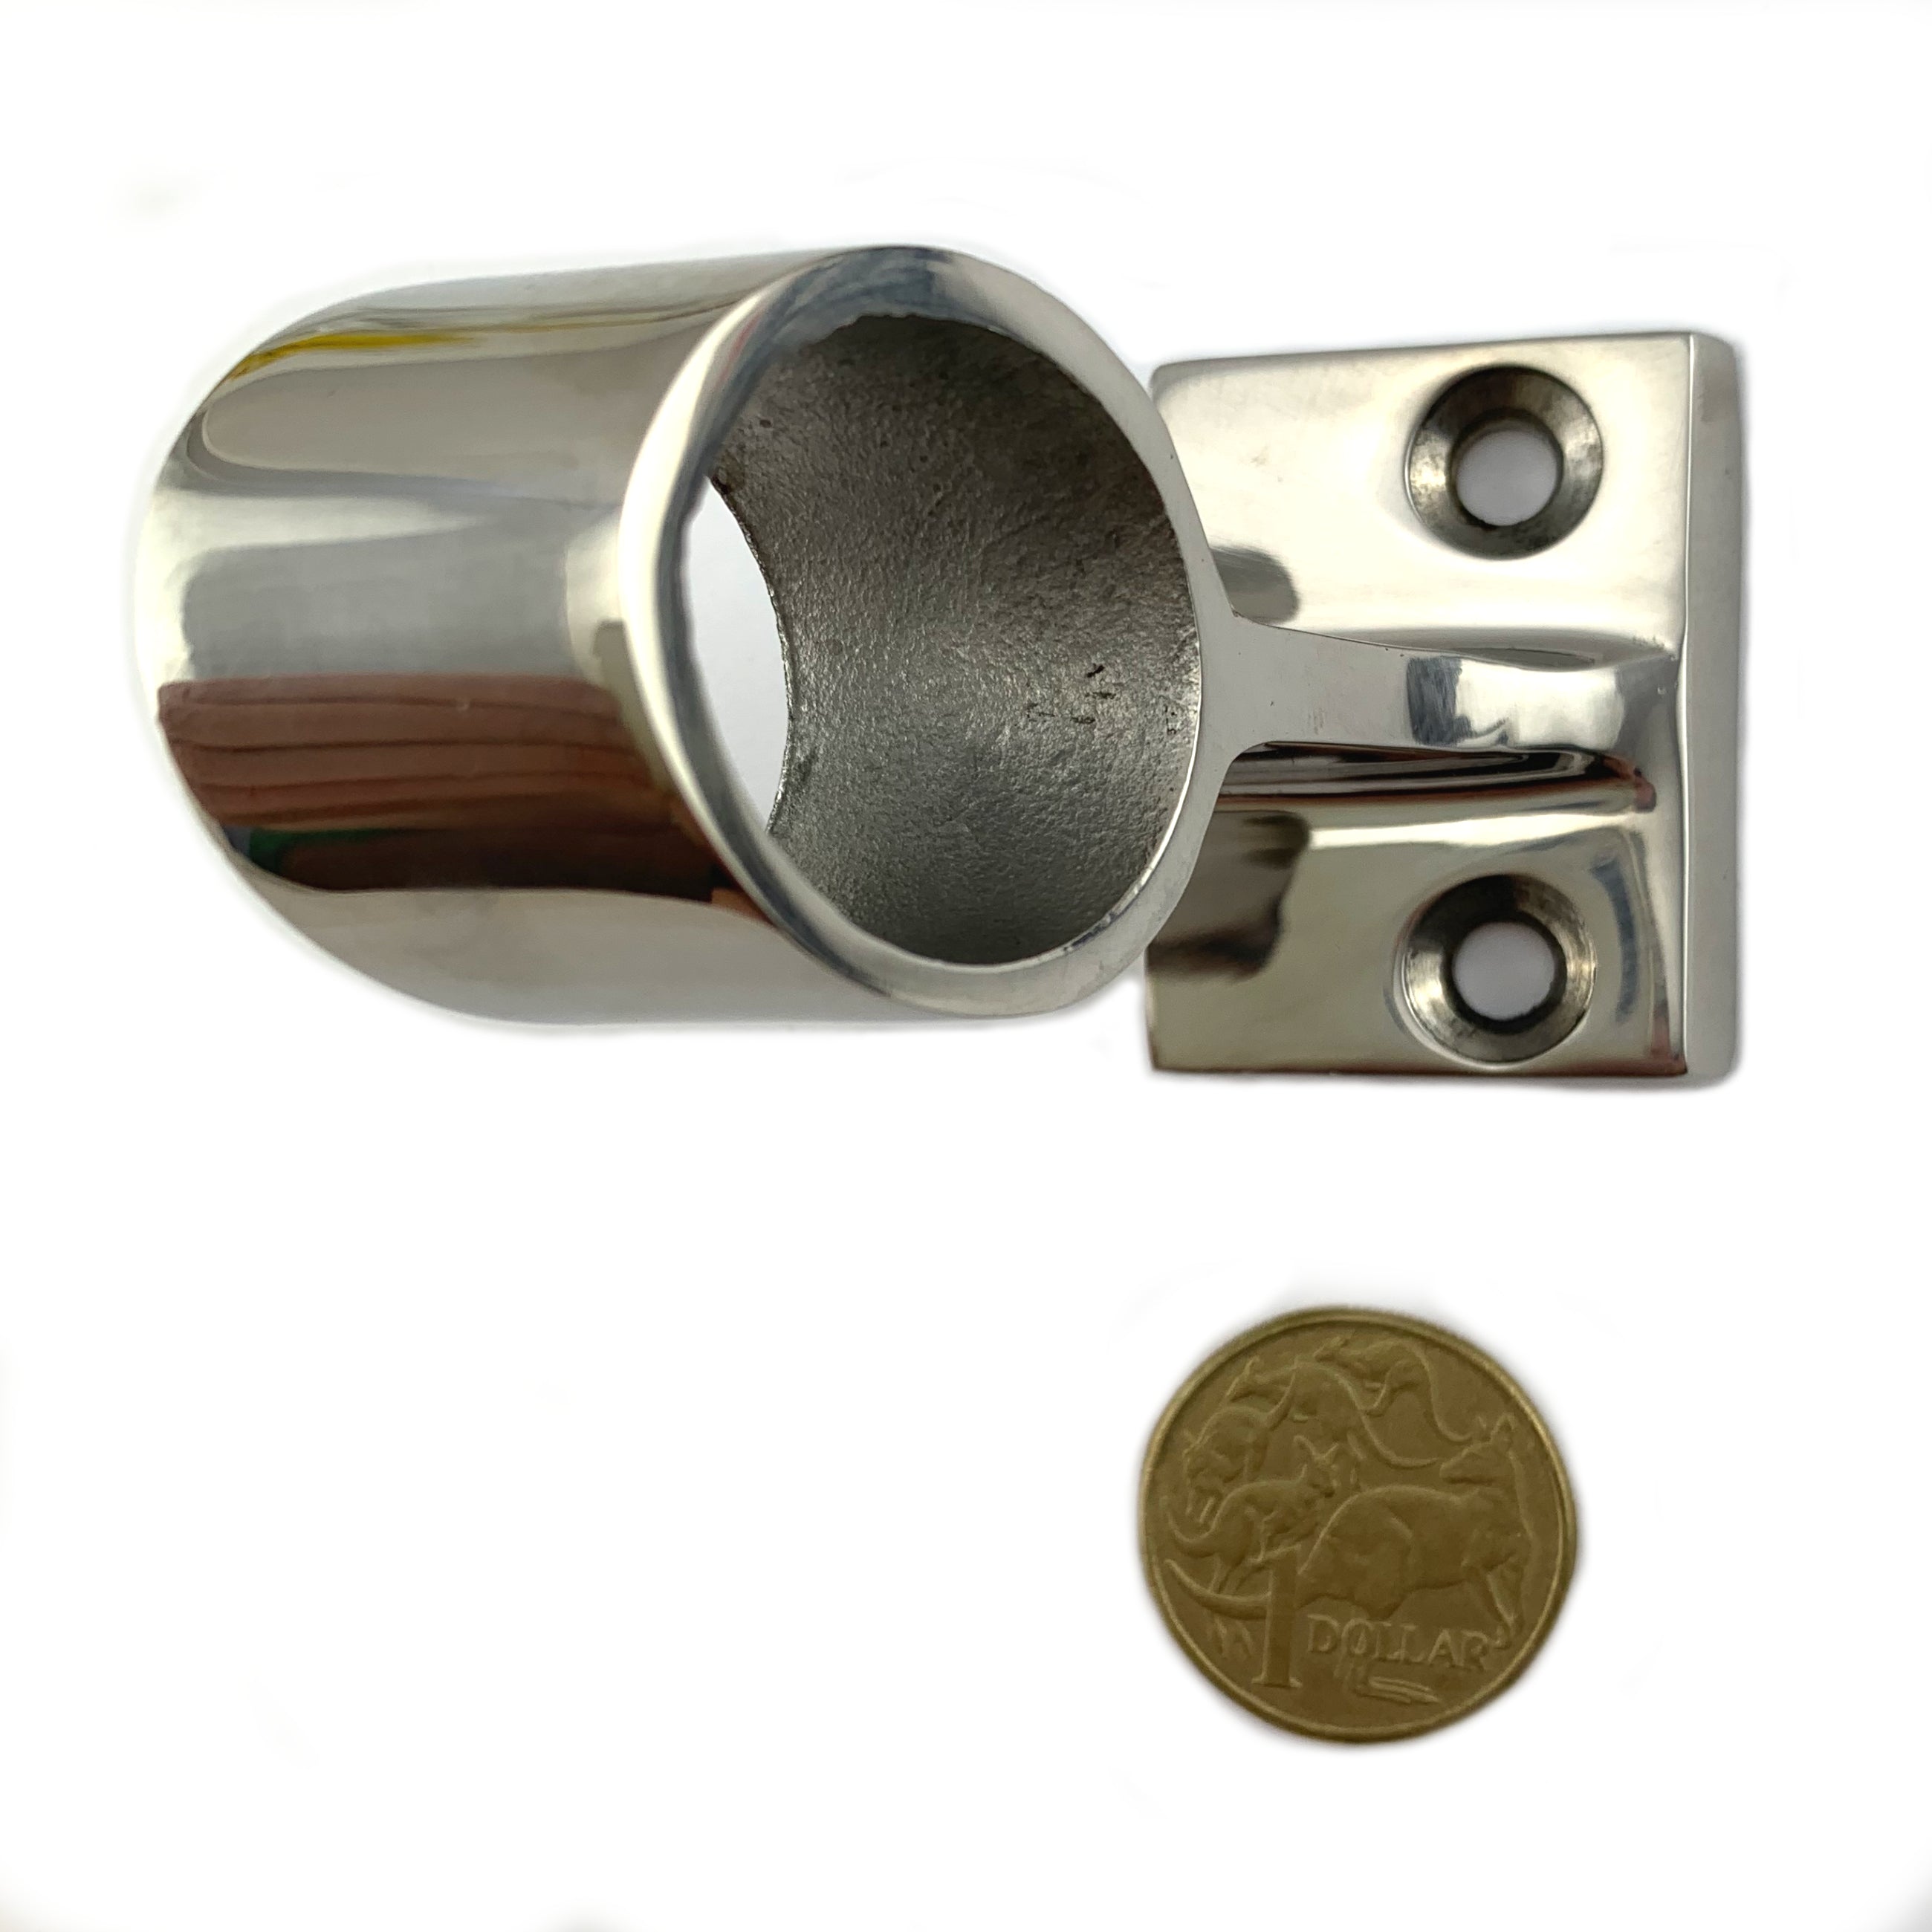 Centre Stanchion, 60-degree, size 25mm stainless steel rail fitting. Australia.